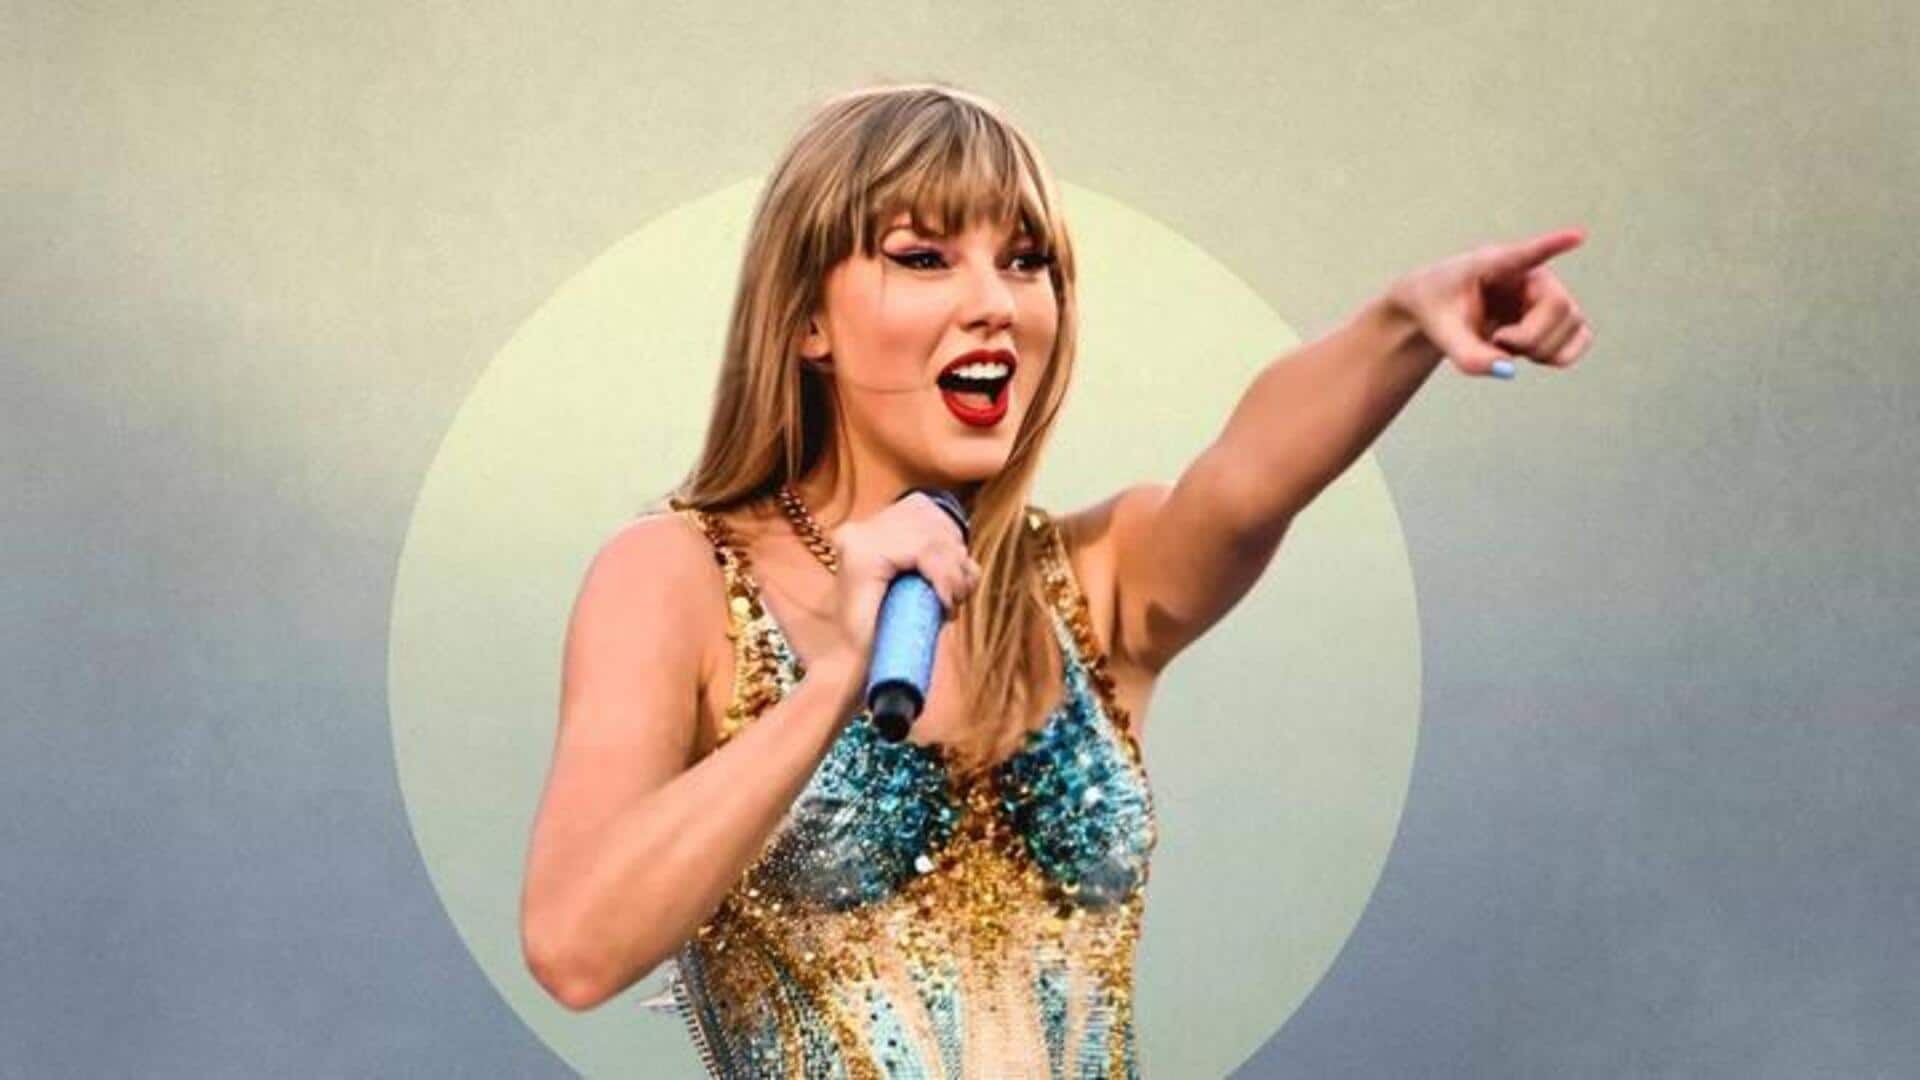 Singapore's grant for Taylor Swift concerts sparks debate